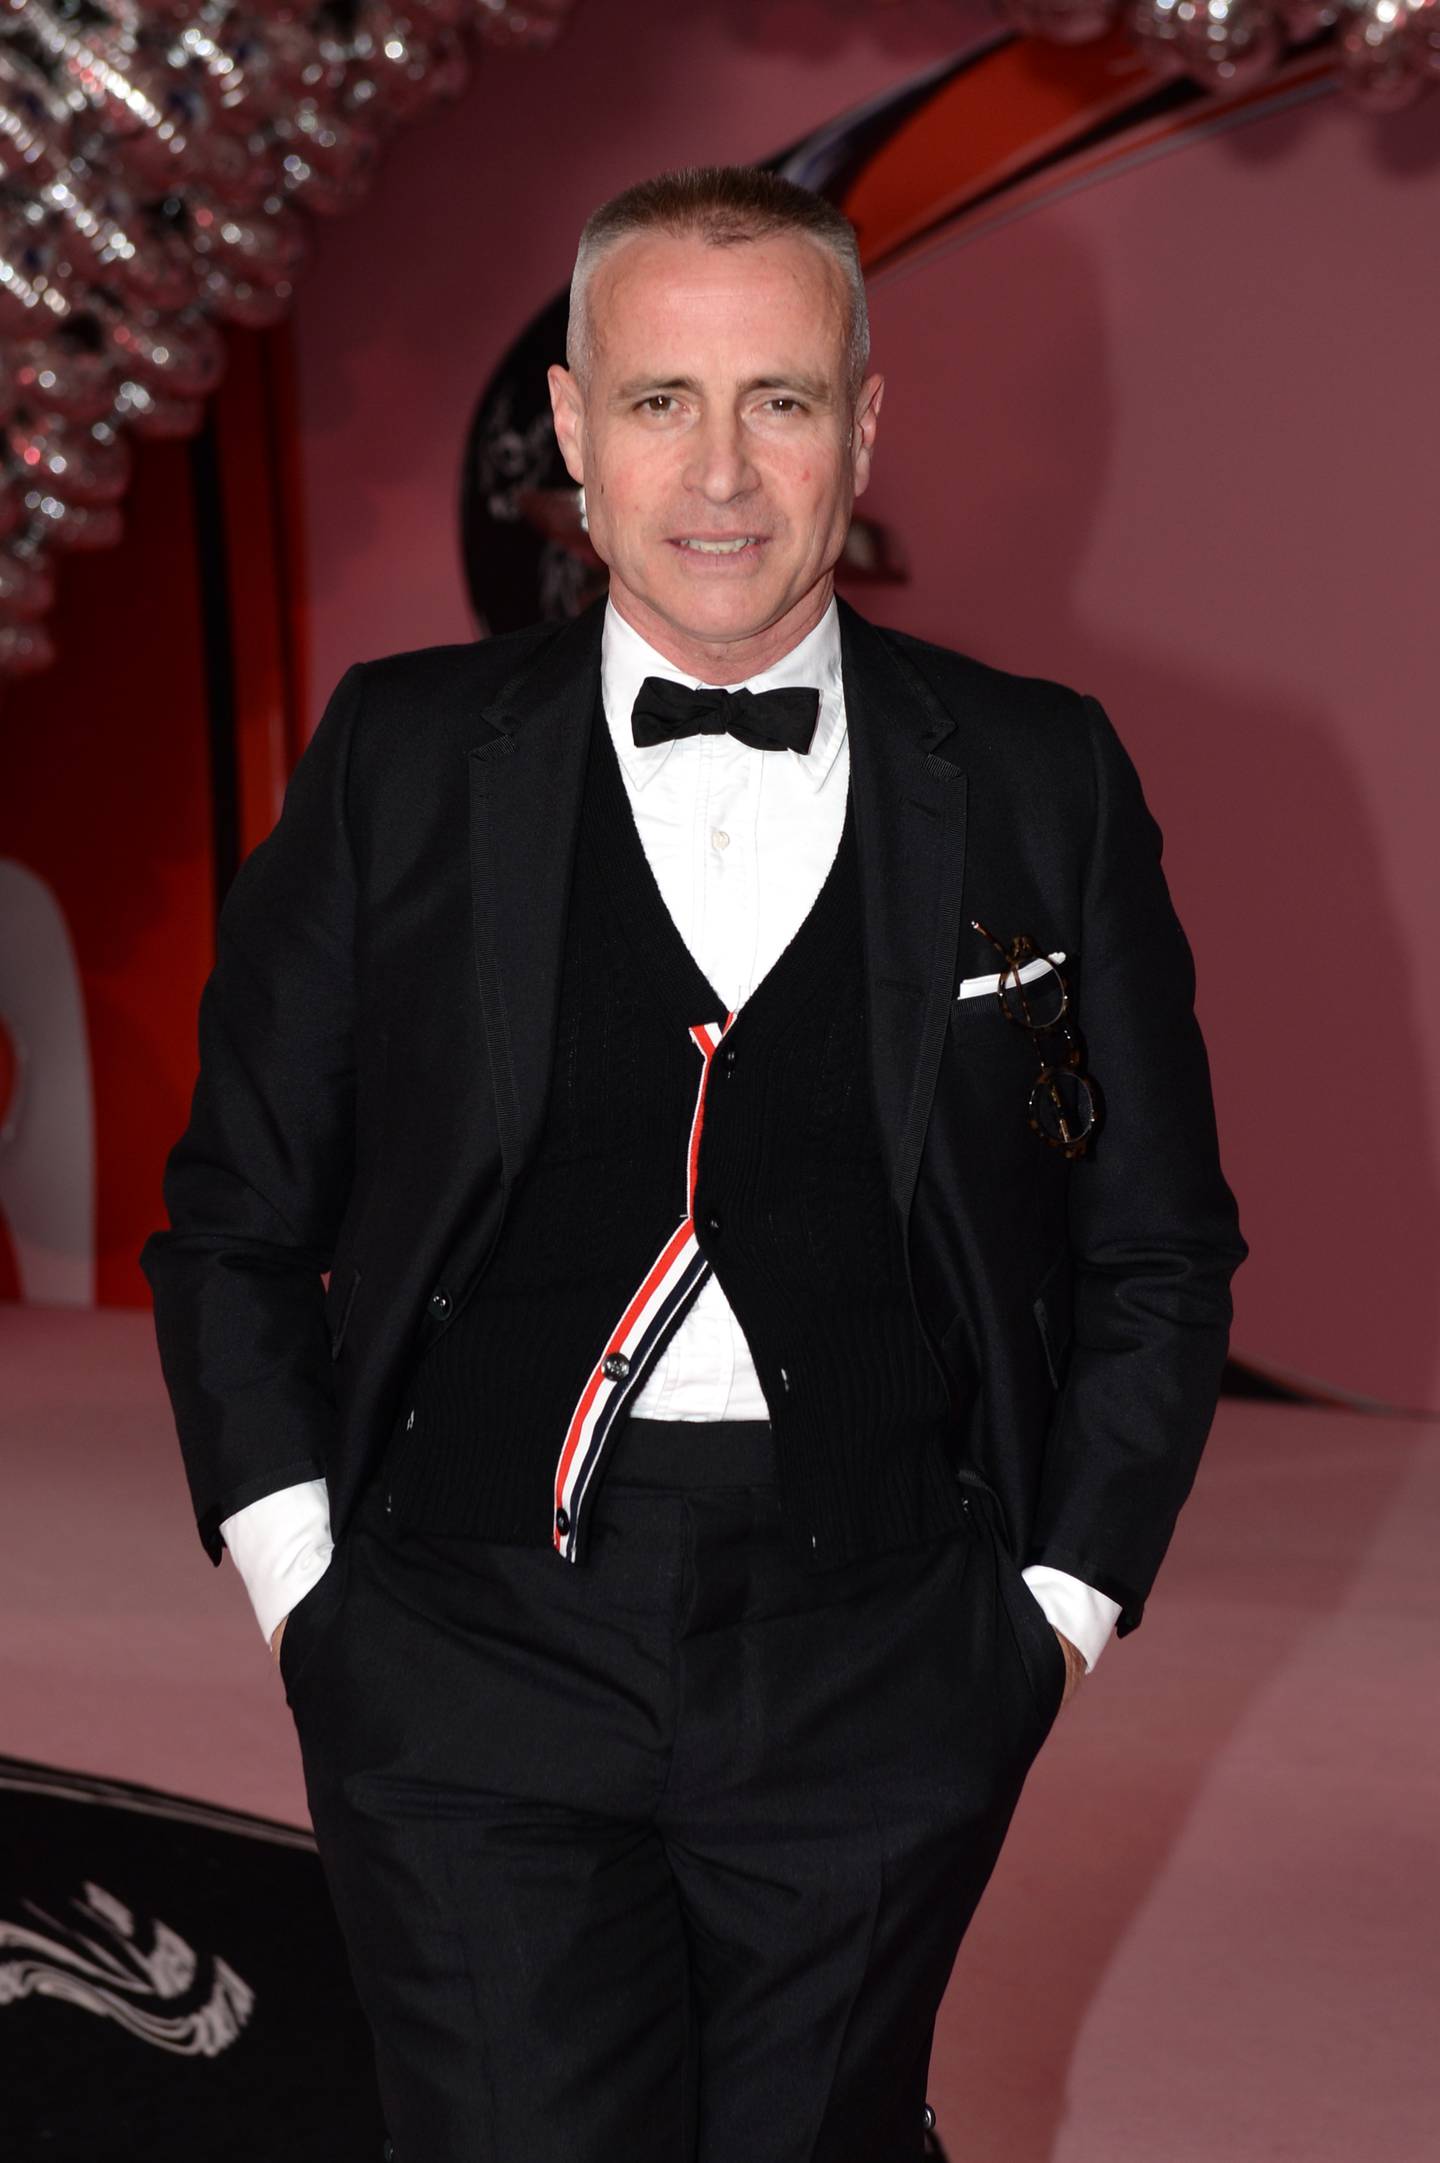 Thom Browne attends the CFDA Fashion Awards in June 2019 in New York City.